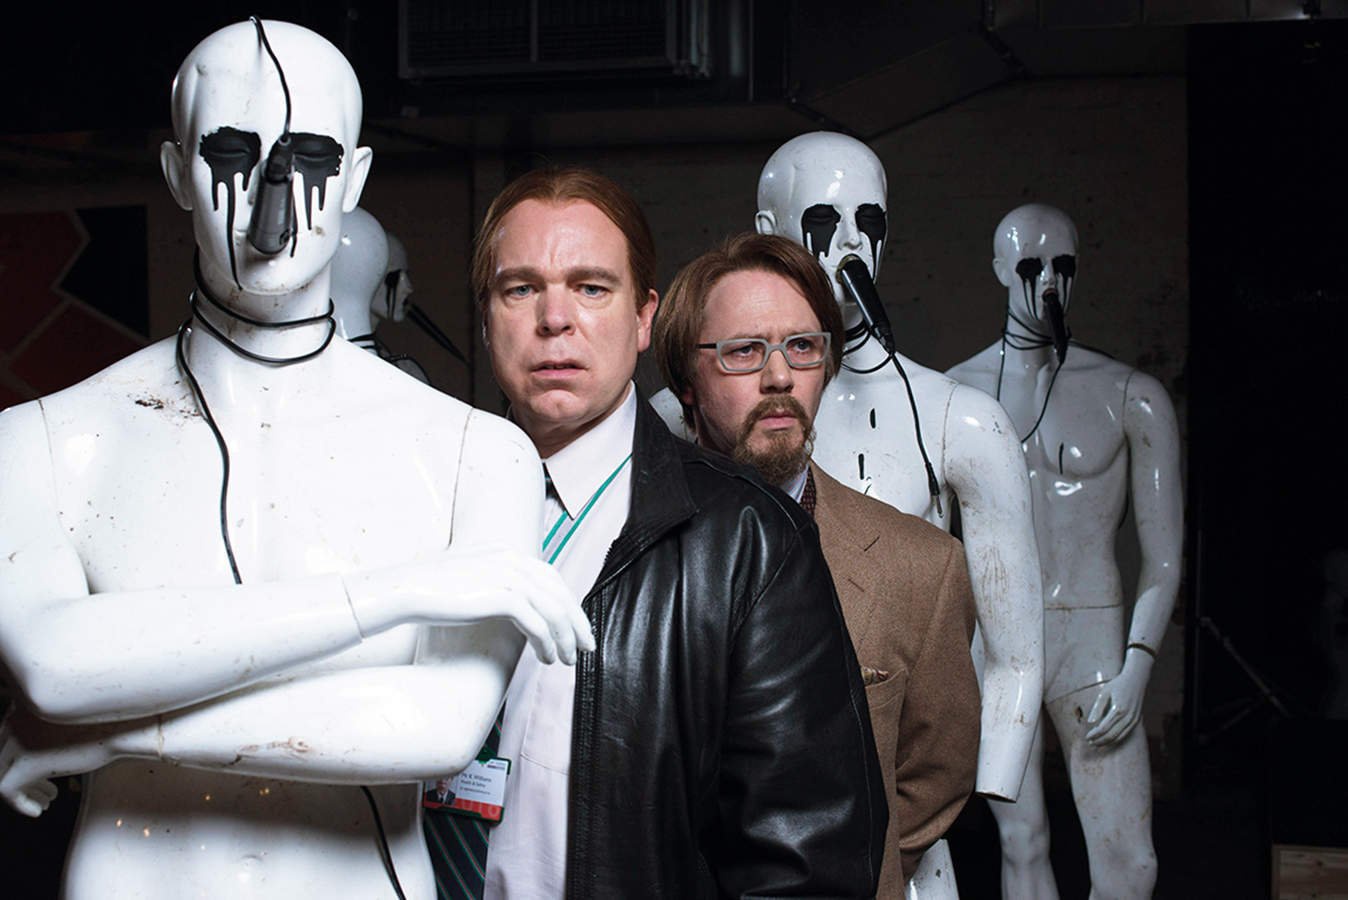 Get Cast in BBC’s ‘Inside No. 9’ + More Greenlit Productions